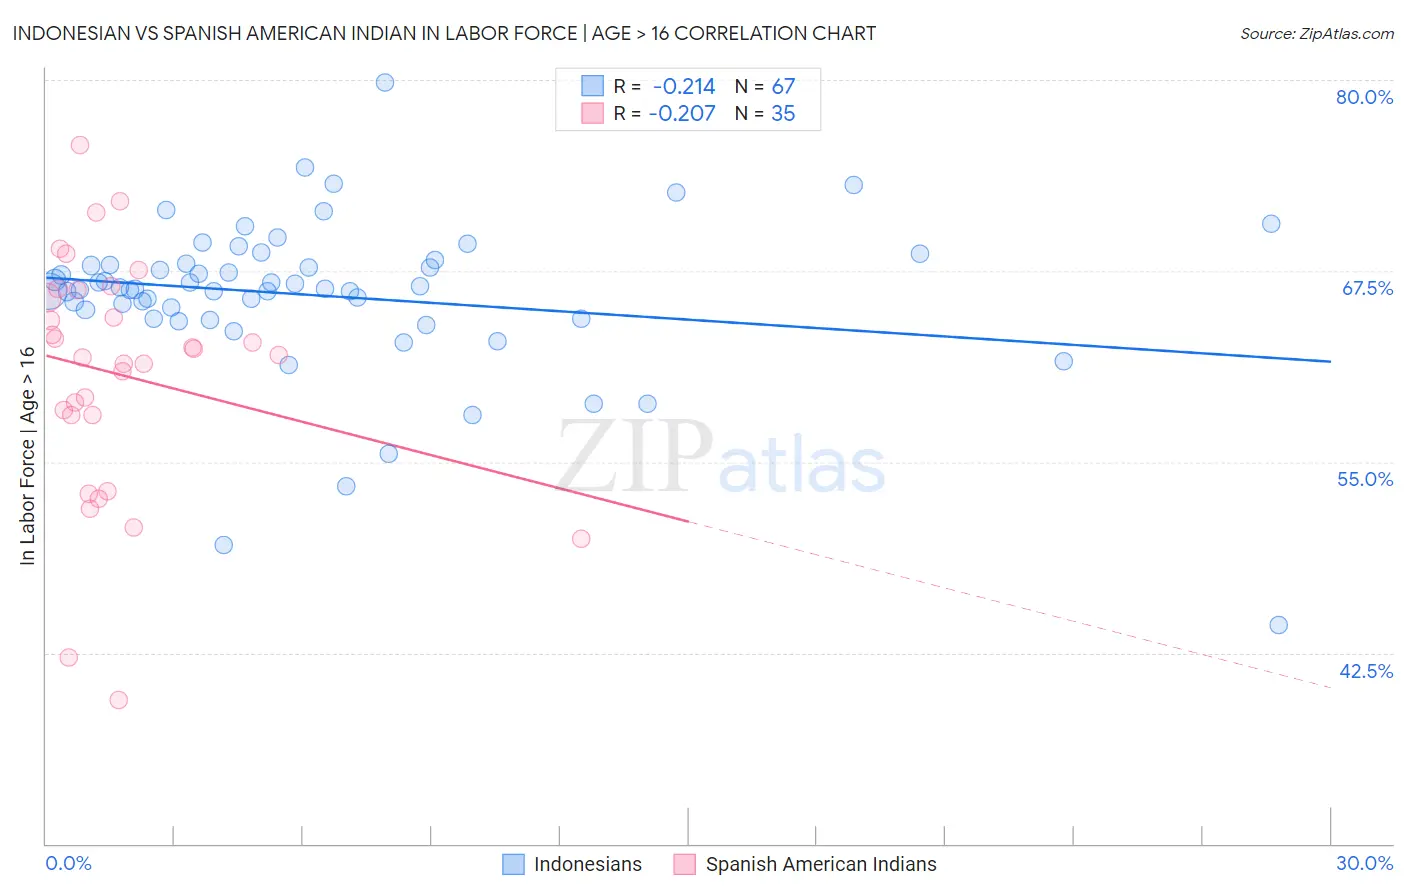 Indonesian vs Spanish American Indian In Labor Force | Age > 16